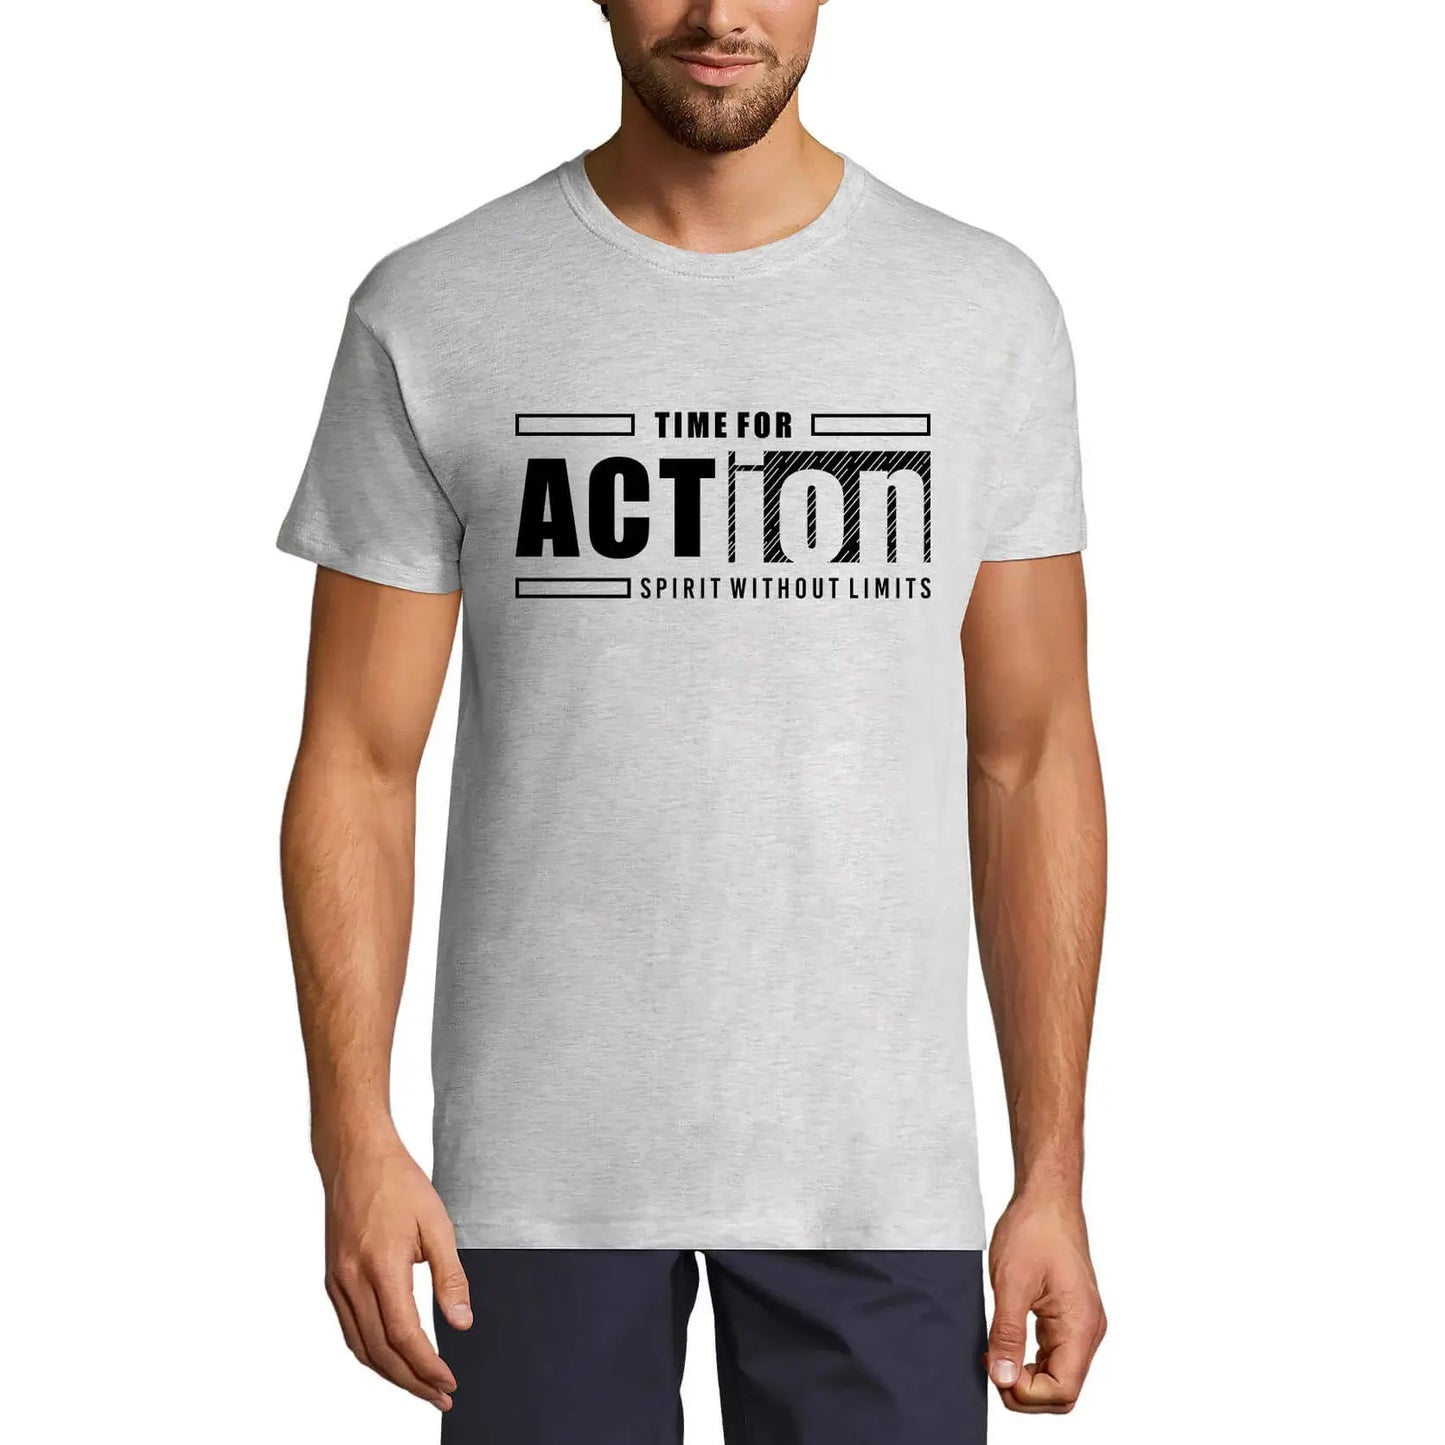 Men's Graphic T-Shirt Time For Action Spirit Without Limits Eco-Friendly Limited Edition Short Sleeve Tee-Shirt Vintage Birthday Gift Novelty